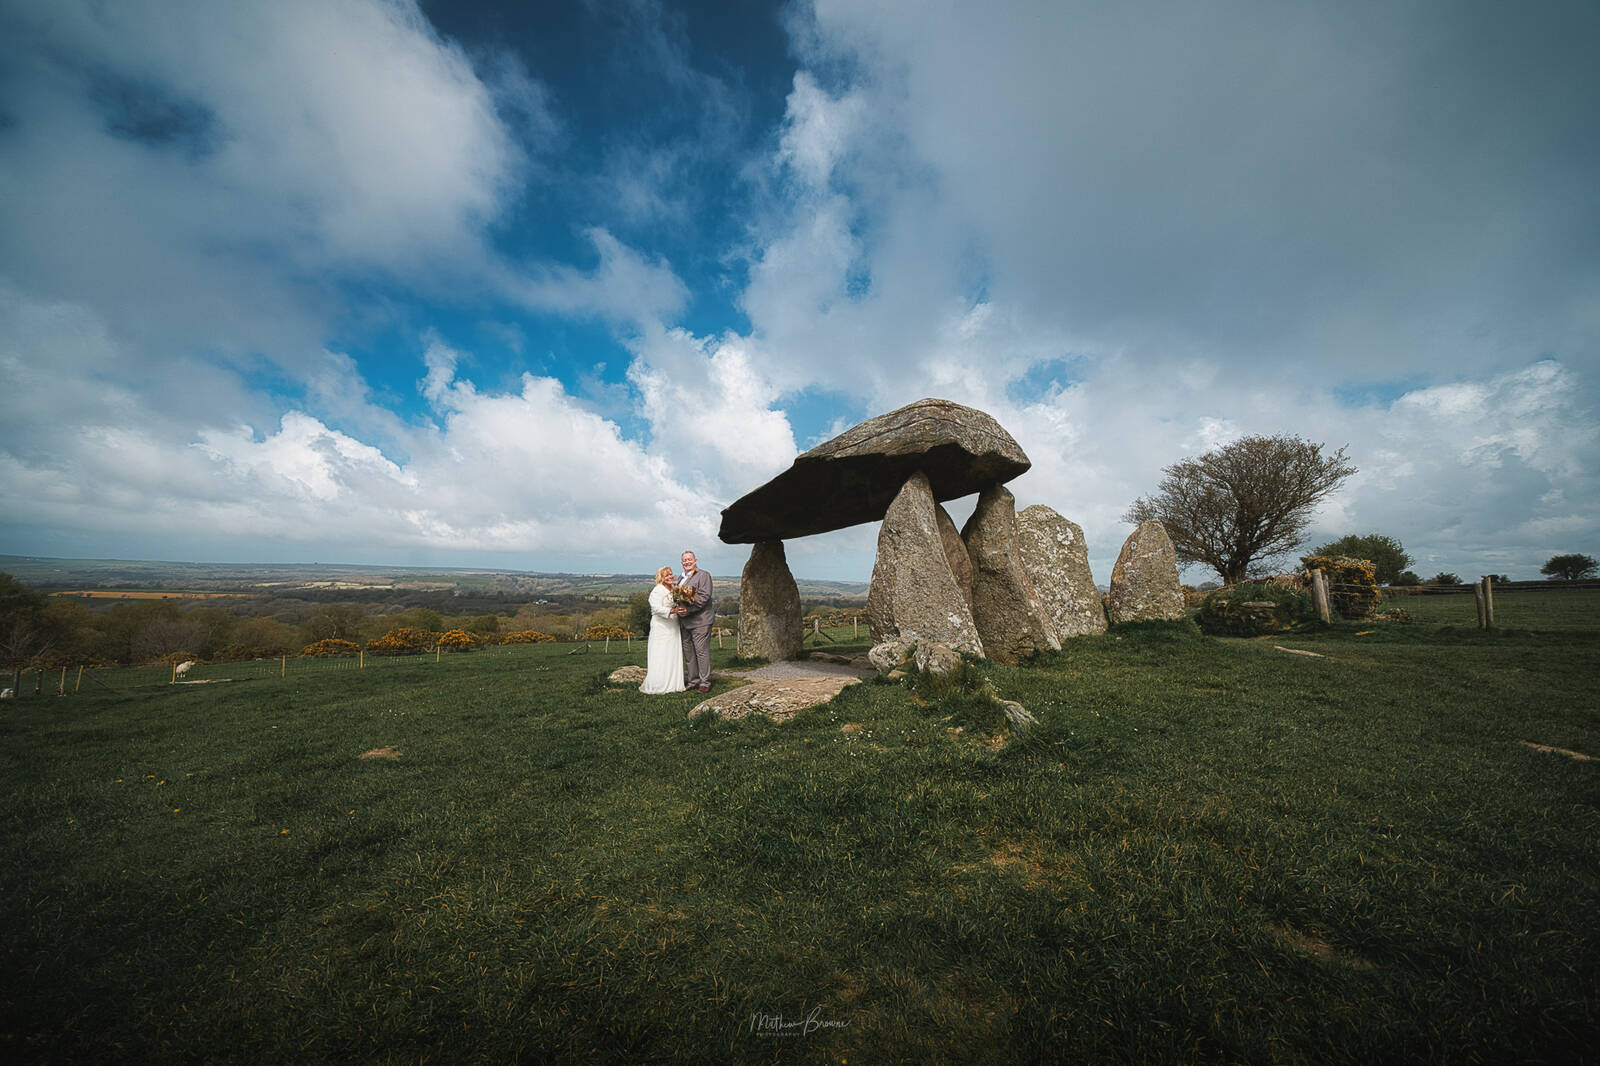 Image of Pentre Ifan Burial Chamber by Mathew Browne